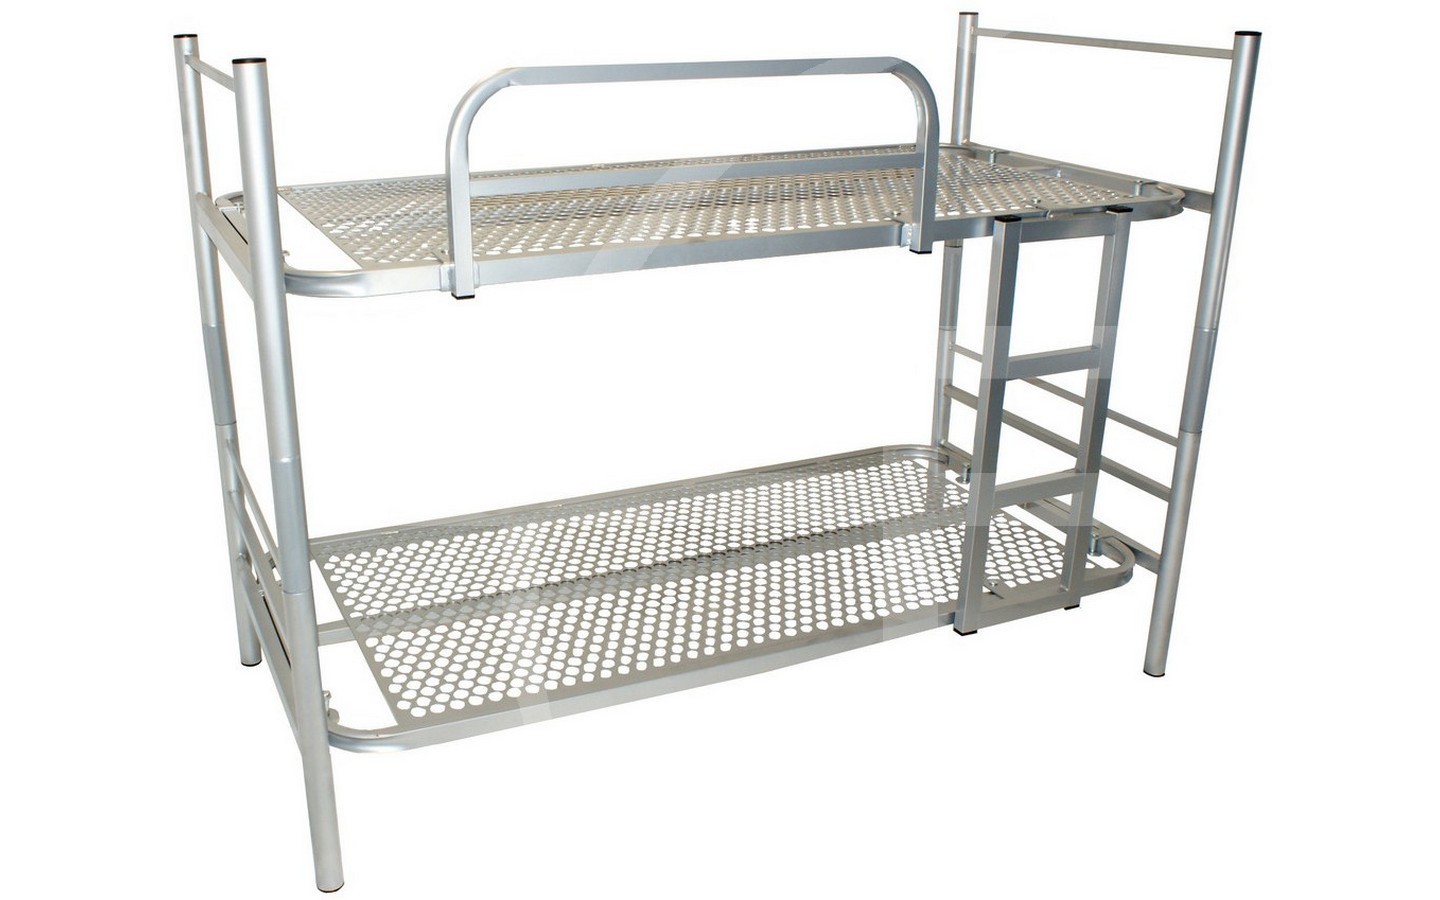 Bunk Beds For S Steel, Used Military Metal Bunk Beds